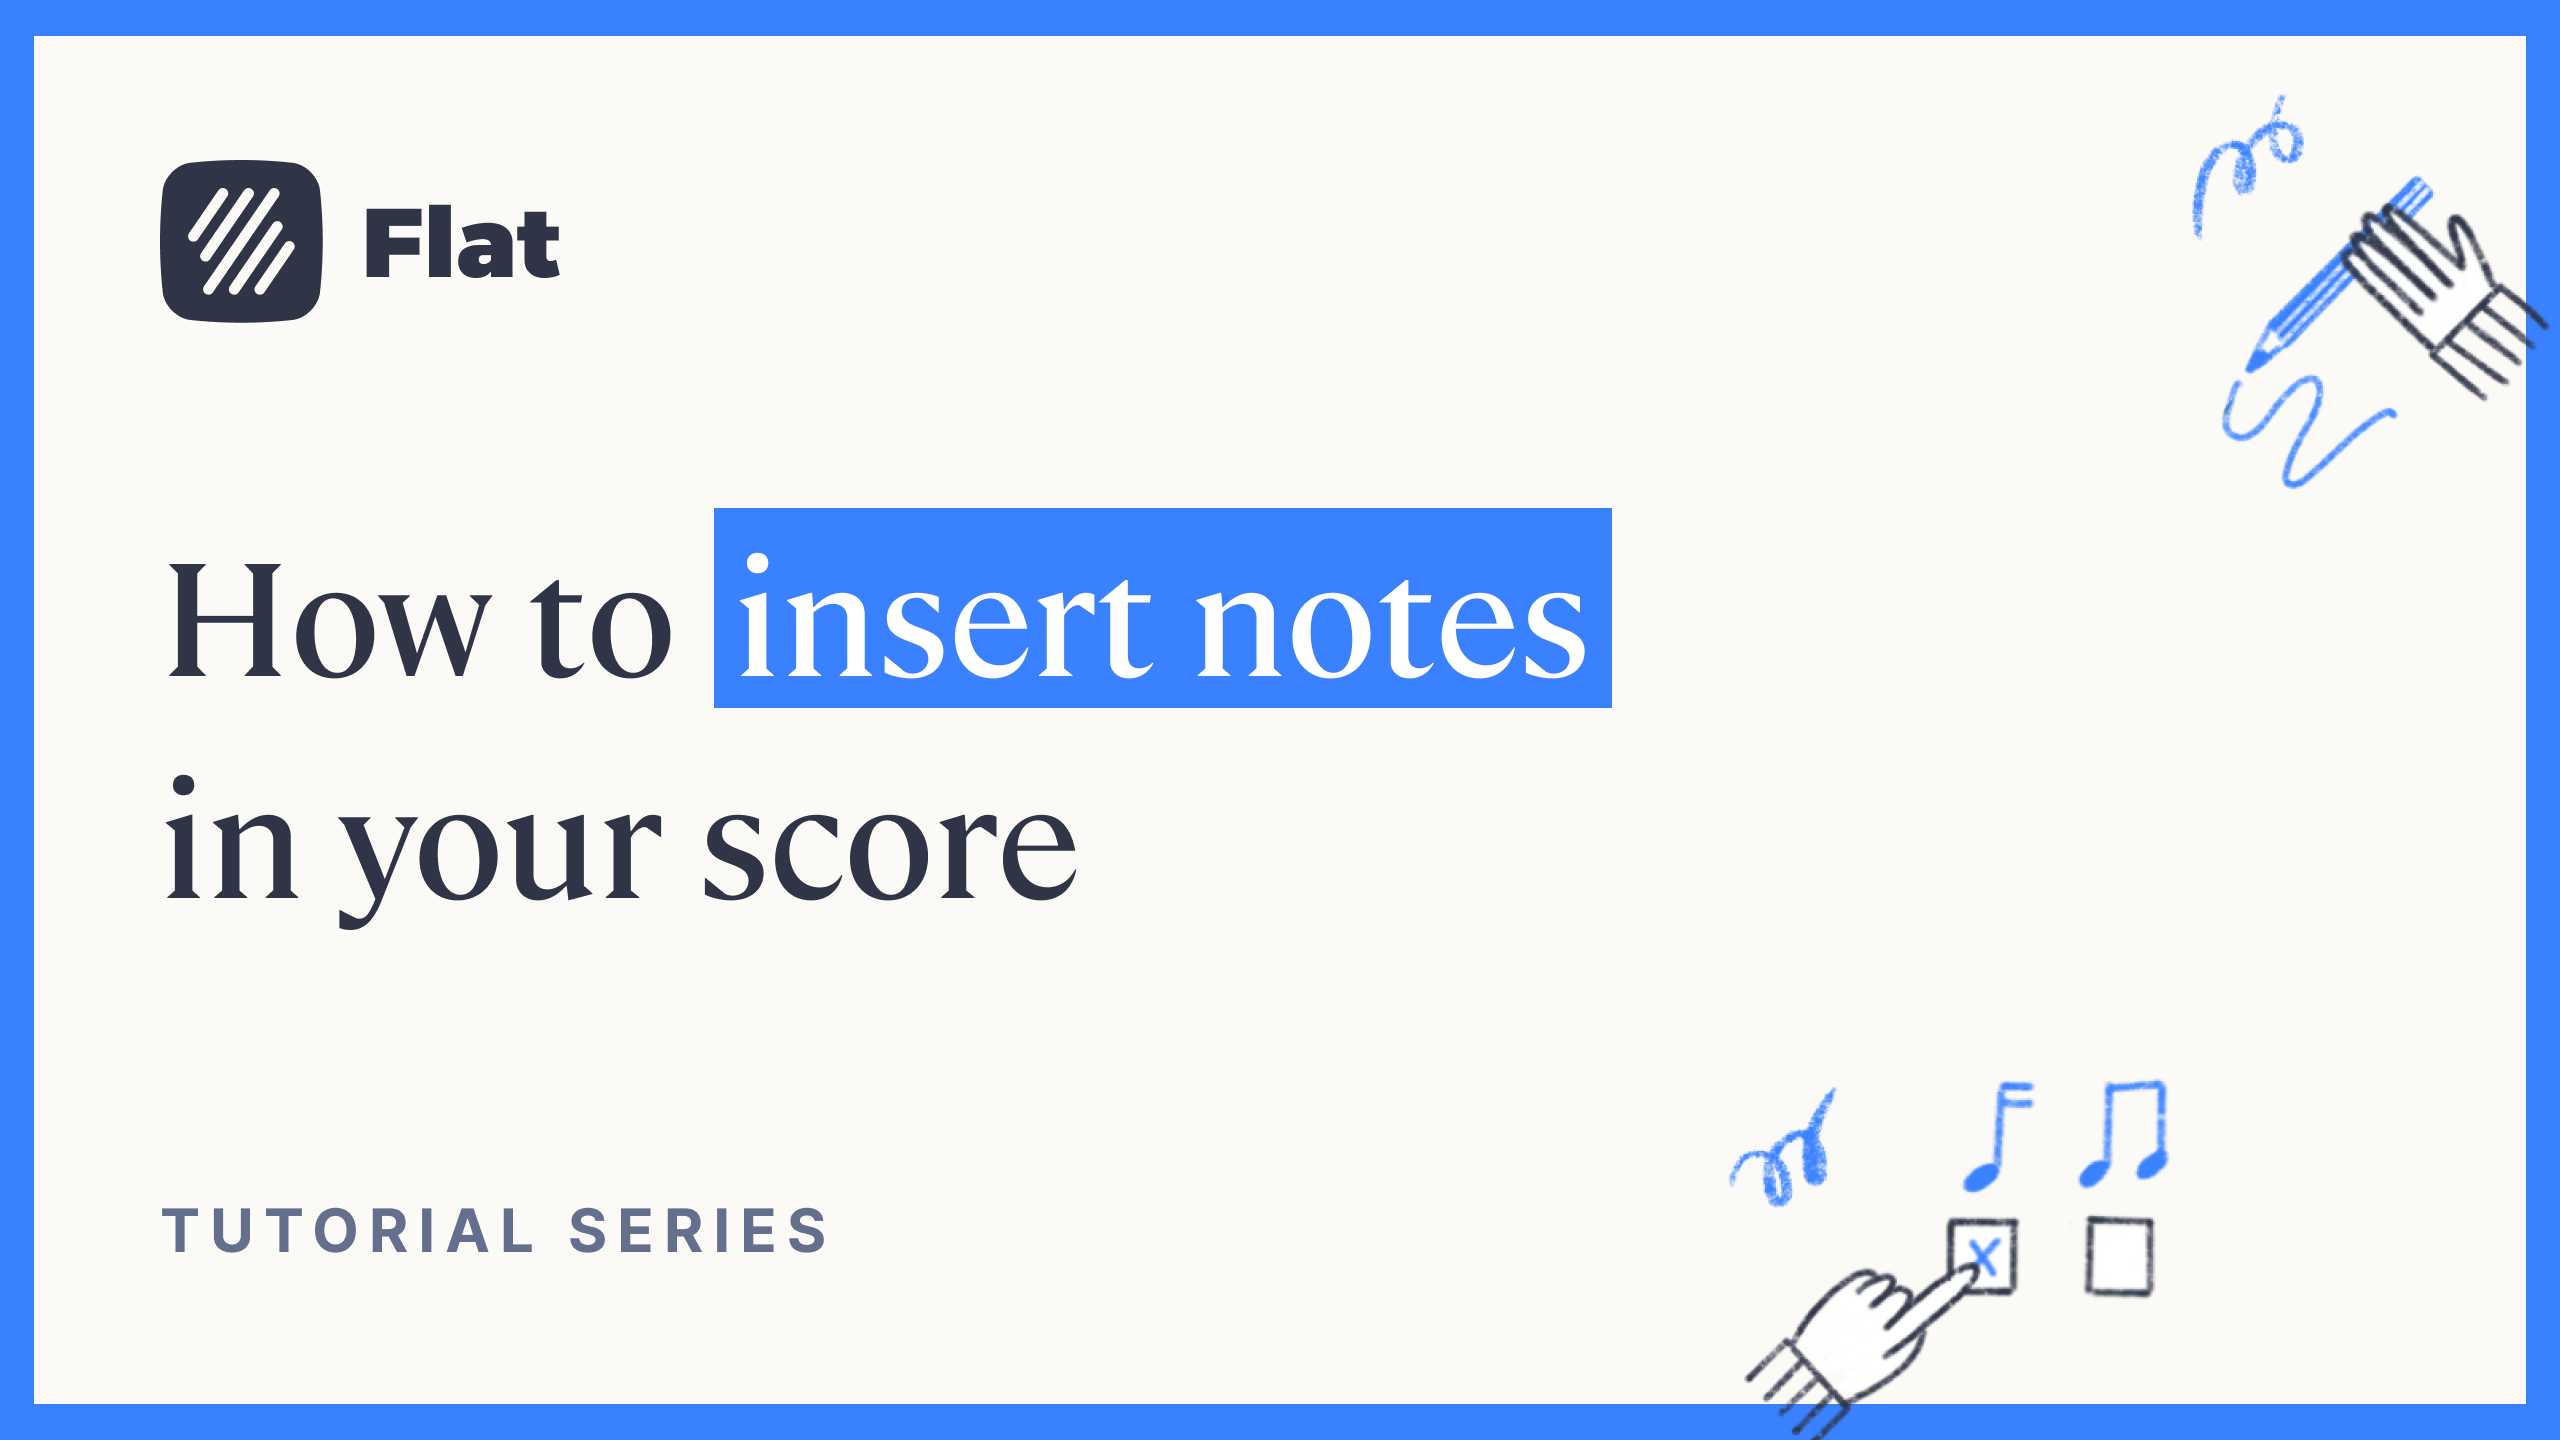 How to insert notes in the score